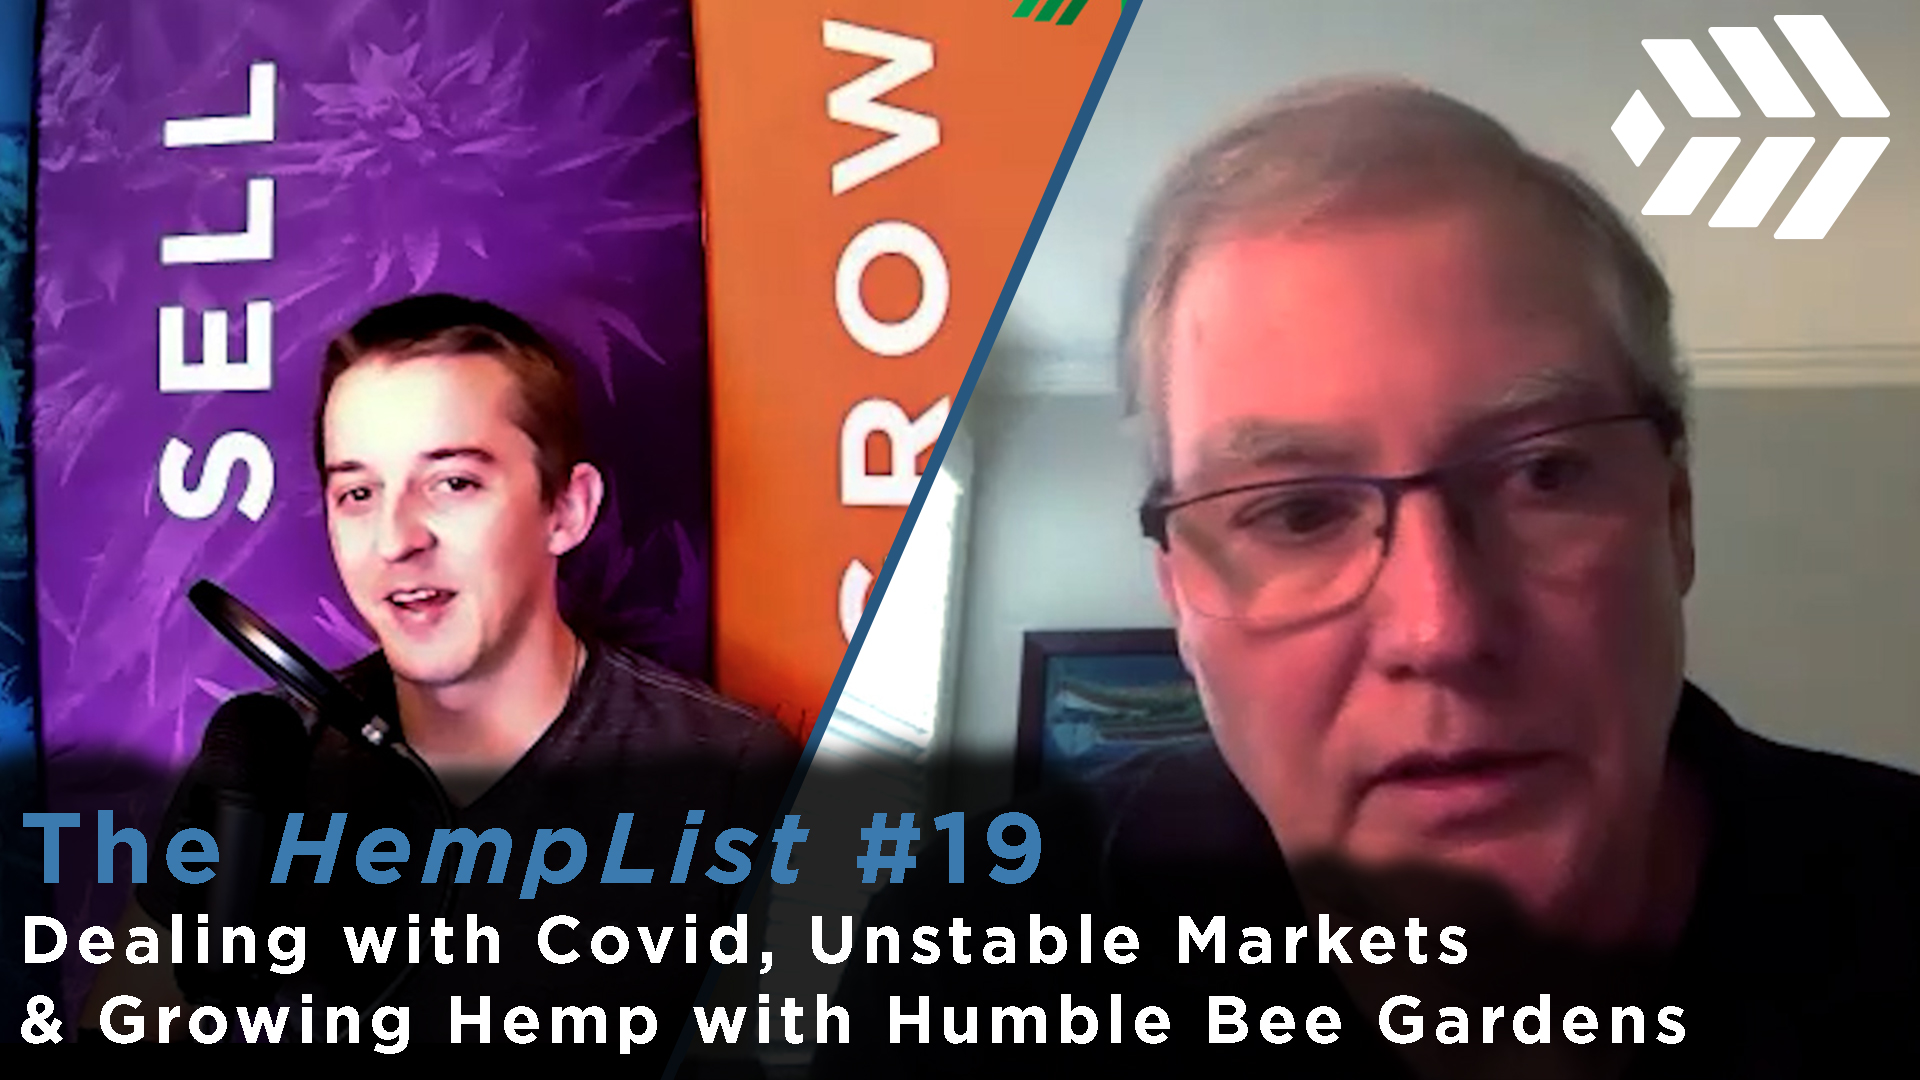 The HempList #19: Dealing with Covid, Unstable Markets & Growing Hemp with Humble Bee Gardens